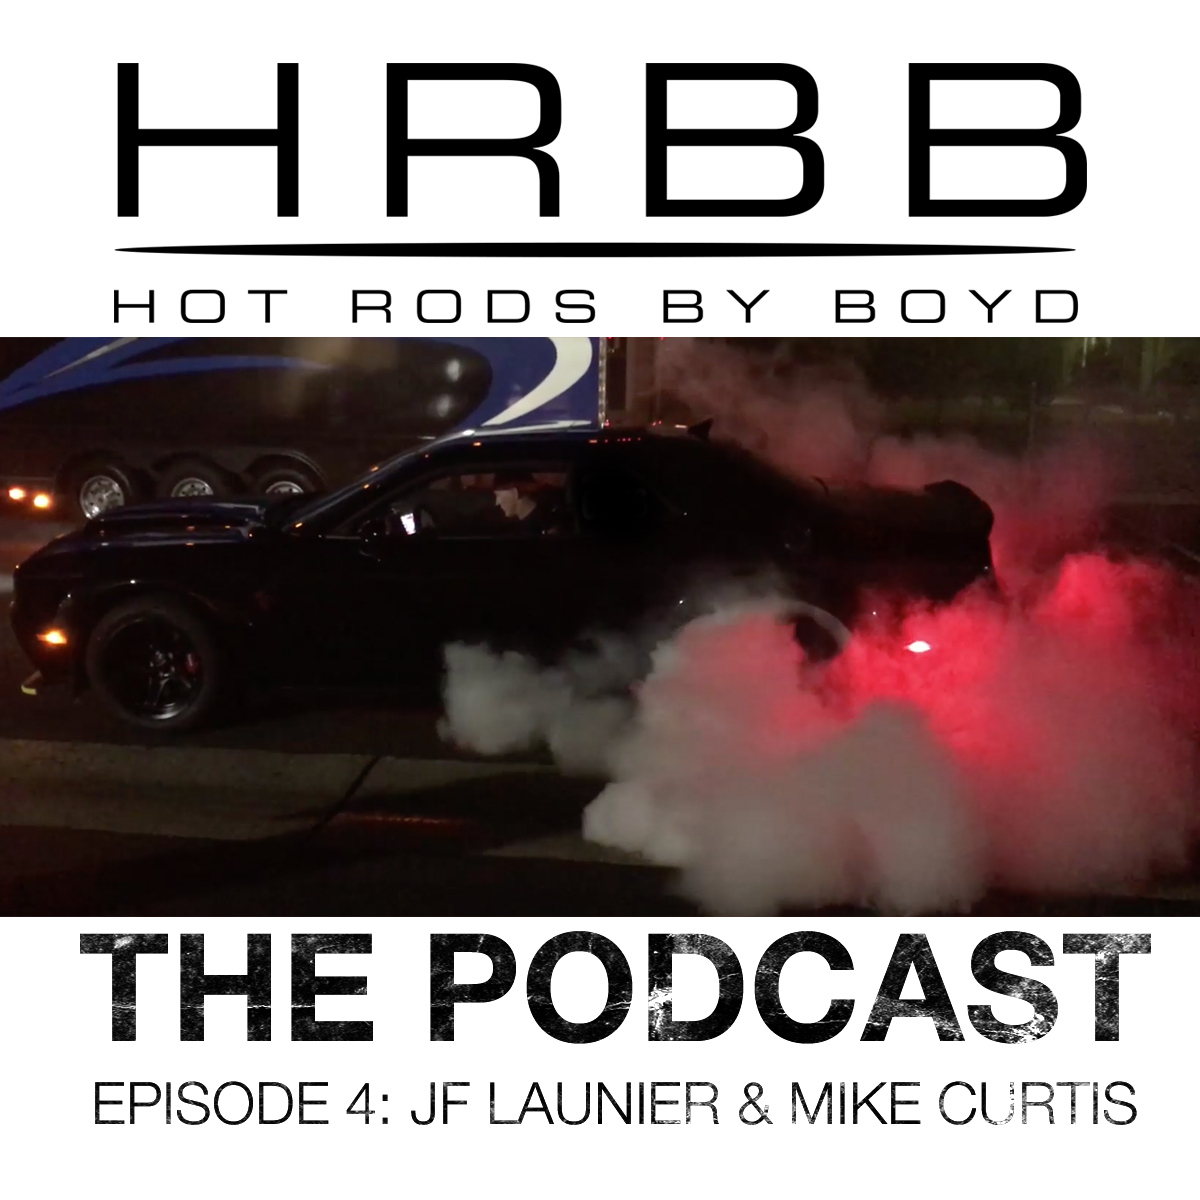 HRBB Podcast Ep4 - JF Launier & Mike Curtis